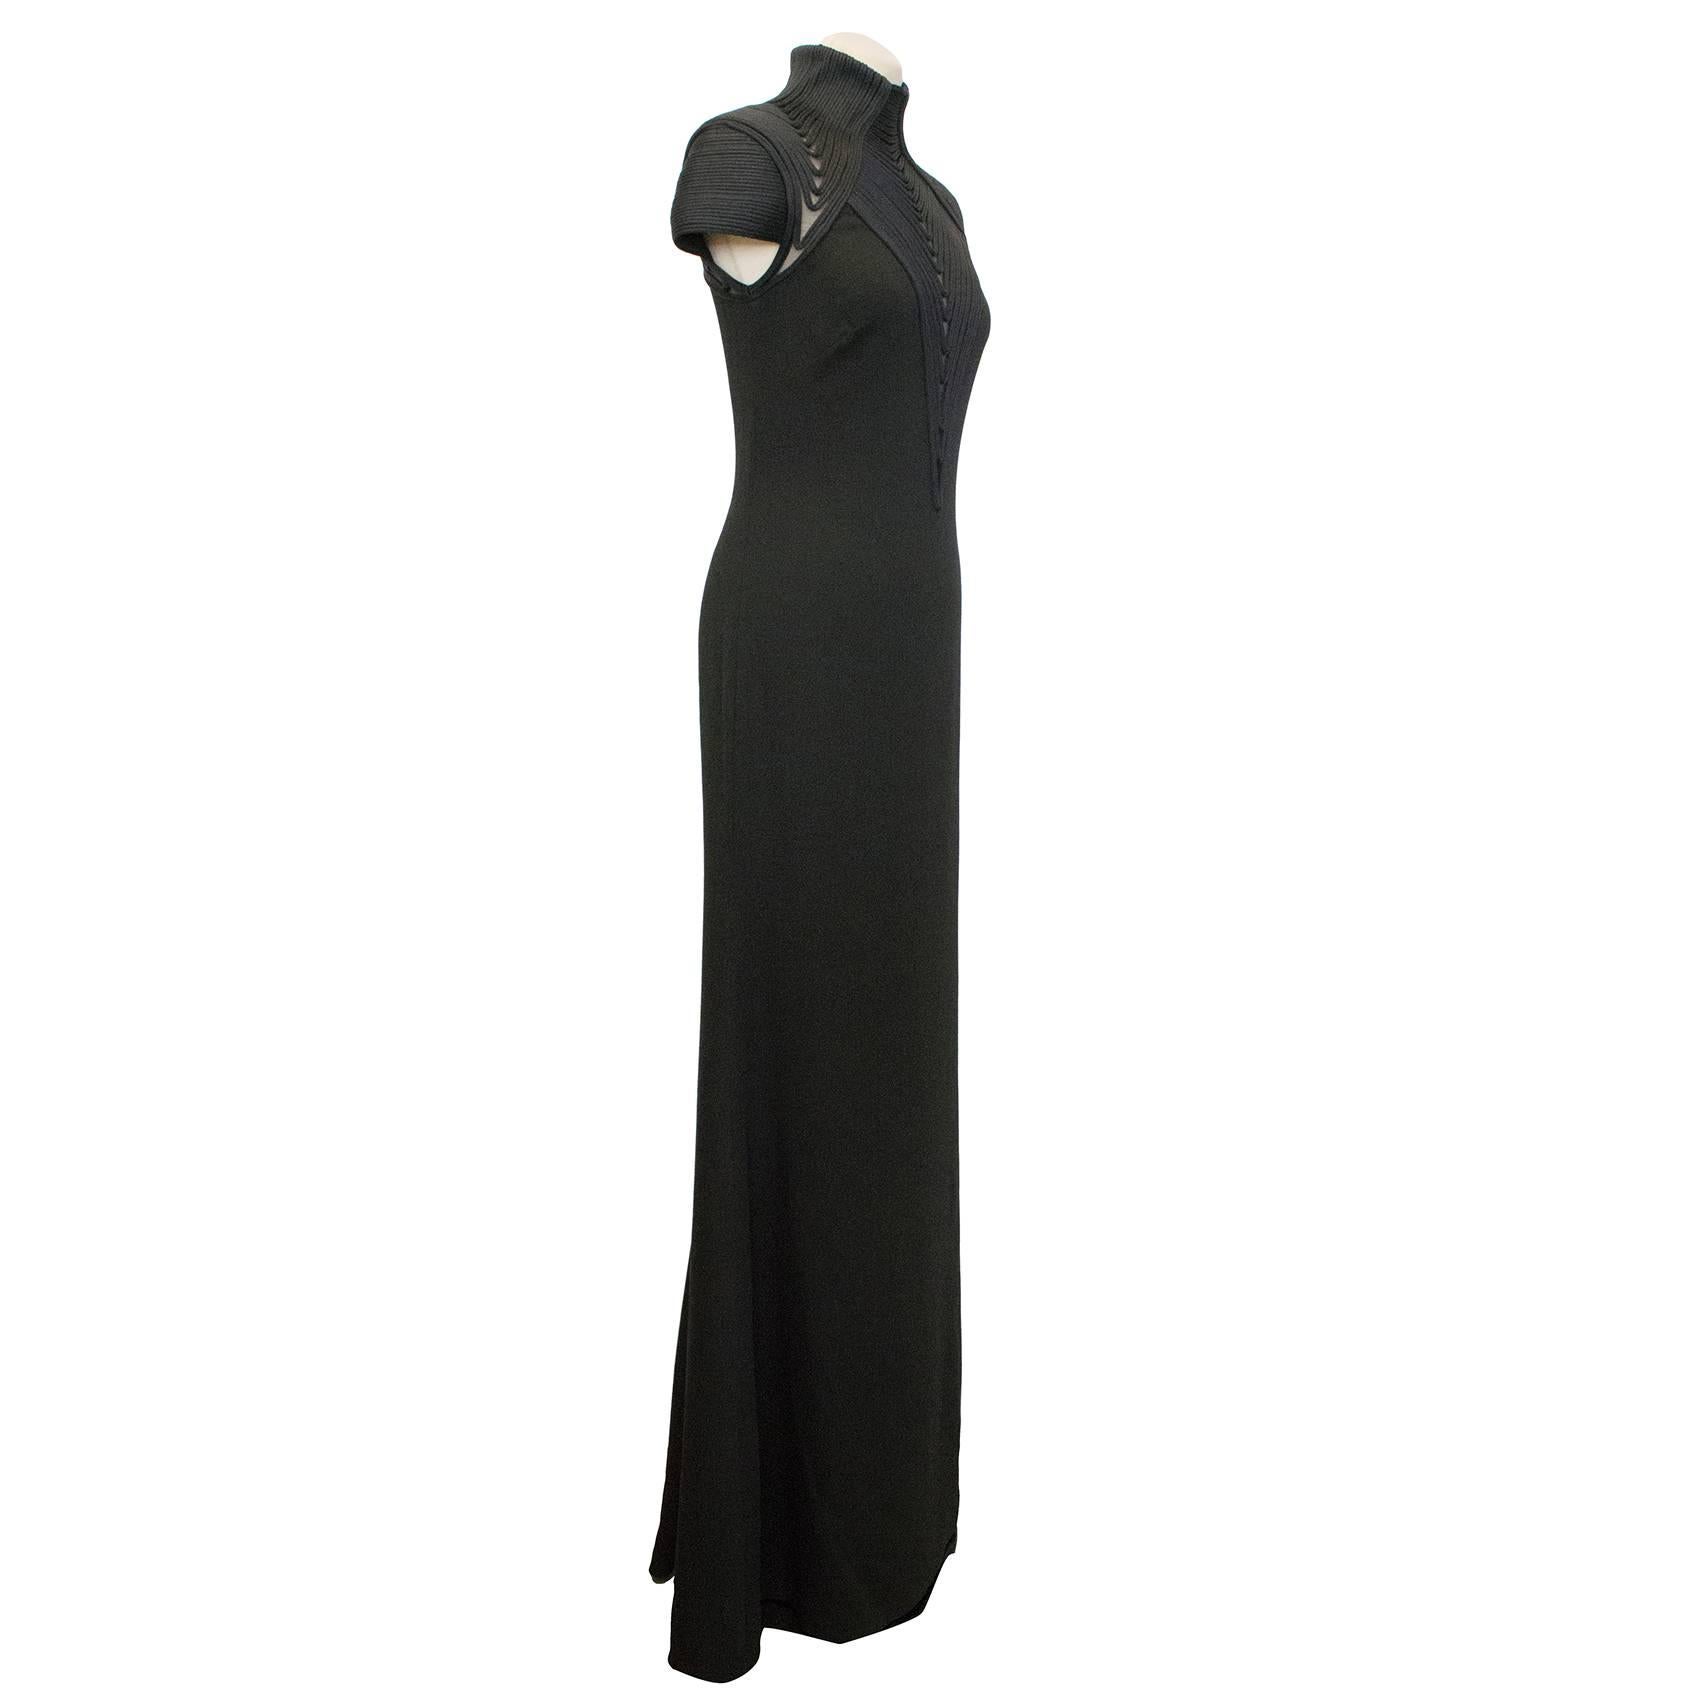 Ralph Lauren "Brita" black evening dress with rope embellishment around neckline and on cap sleeves. Medium weight fabric and soft to the touch, invisible back zip.

Sophisticated gown, designed with stretch silk cording and sheer tulle